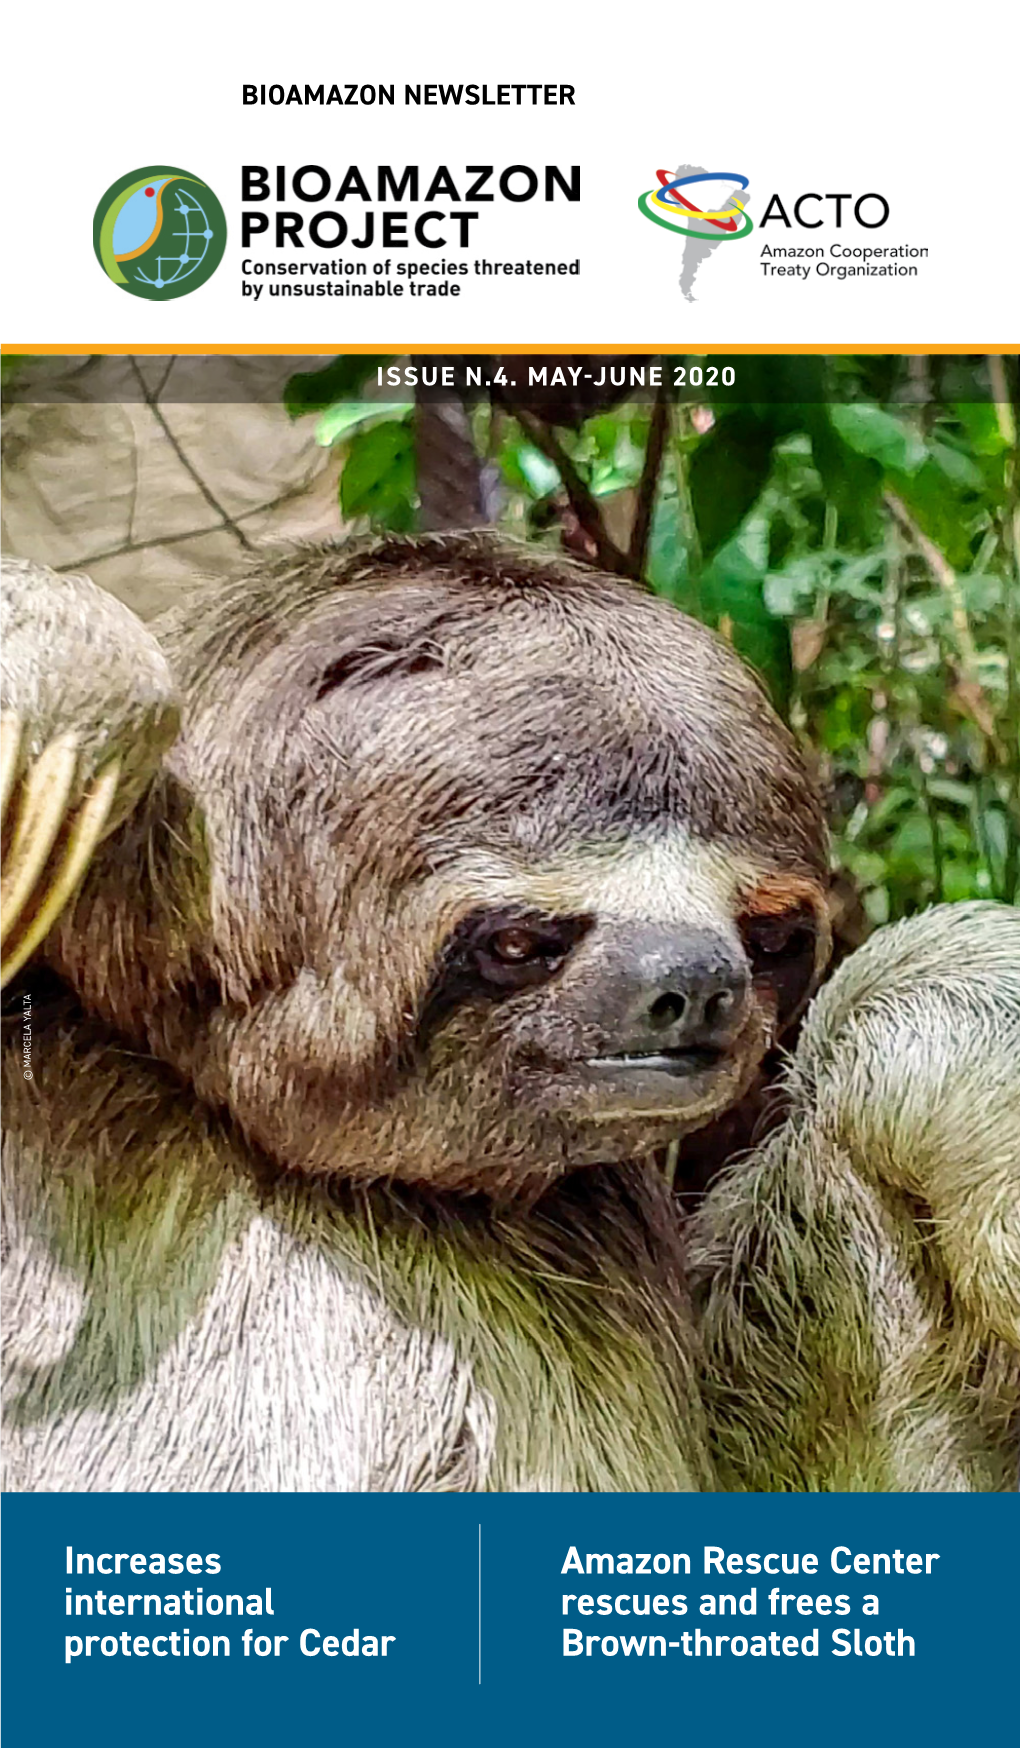 Amazon Rescue Center Rescues and Frees a Brown-Throated Sloth Meet “Schumacher”, a Sloth Rescued While Trying to Cross a Road in Iquitos (Peru)